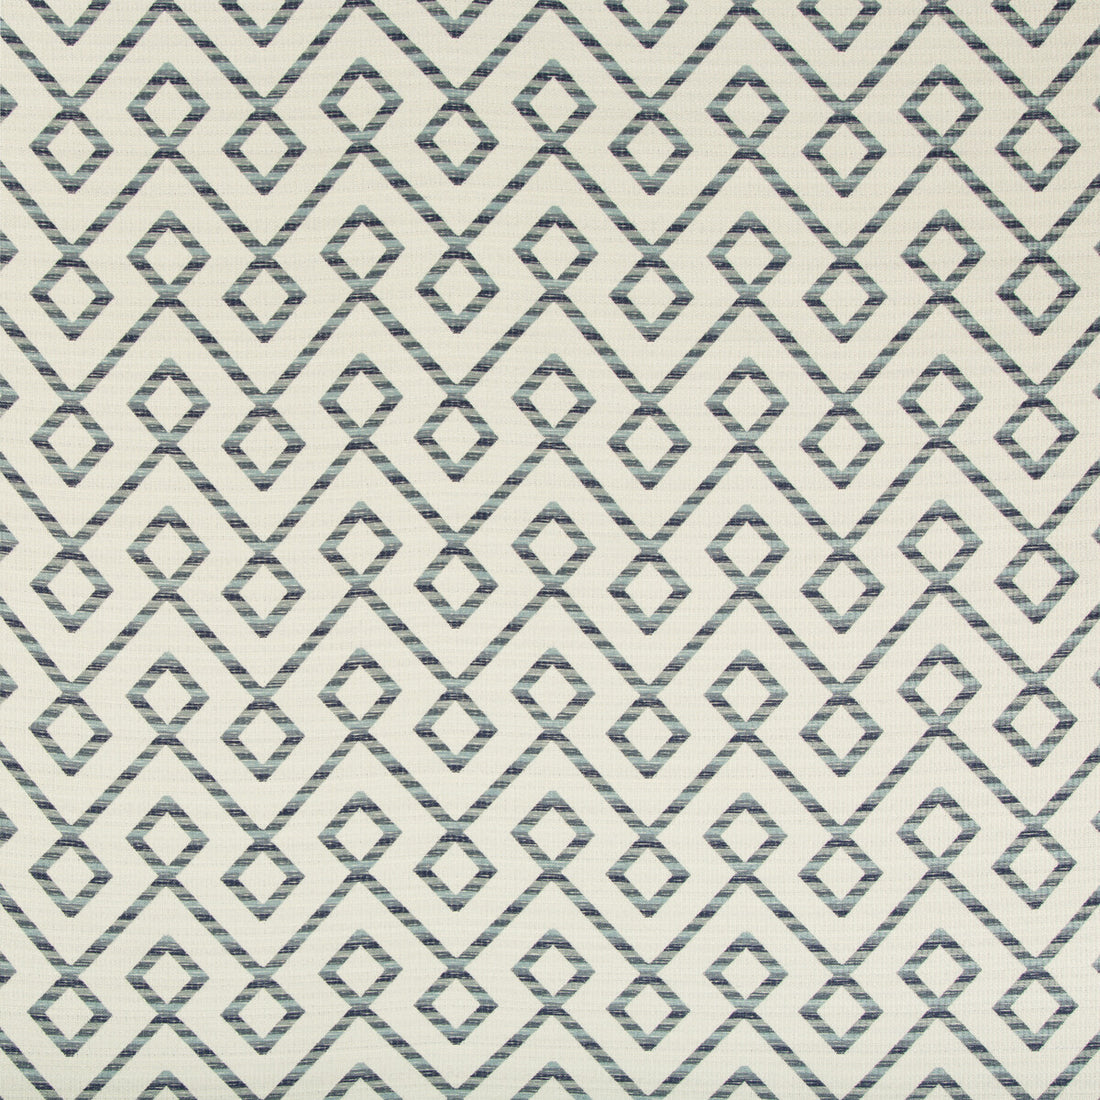 Kravet Contract fabric in 34758-1615 color - pattern 34758.1615.0 - by Kravet Contract in the Incase Crypton Gis collection